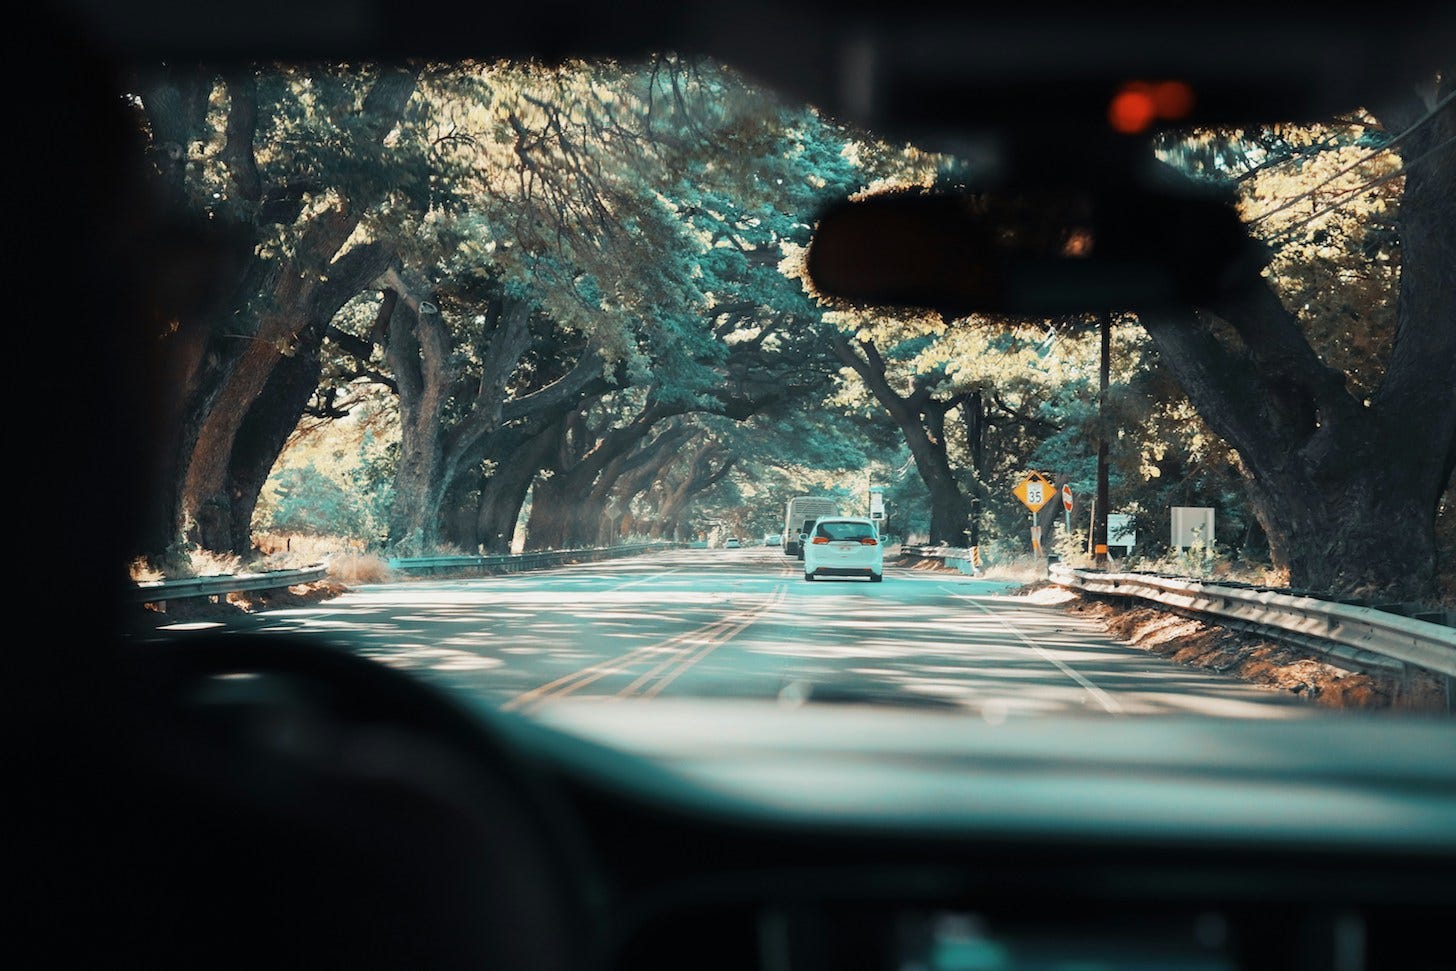 Looking out the front window of a car to a Maui street with huge trees meeting in an arch overhead. The picture is taken through the windshield, with rearview mirror and dashboard and the partial silhouette of a driver all framing the view.